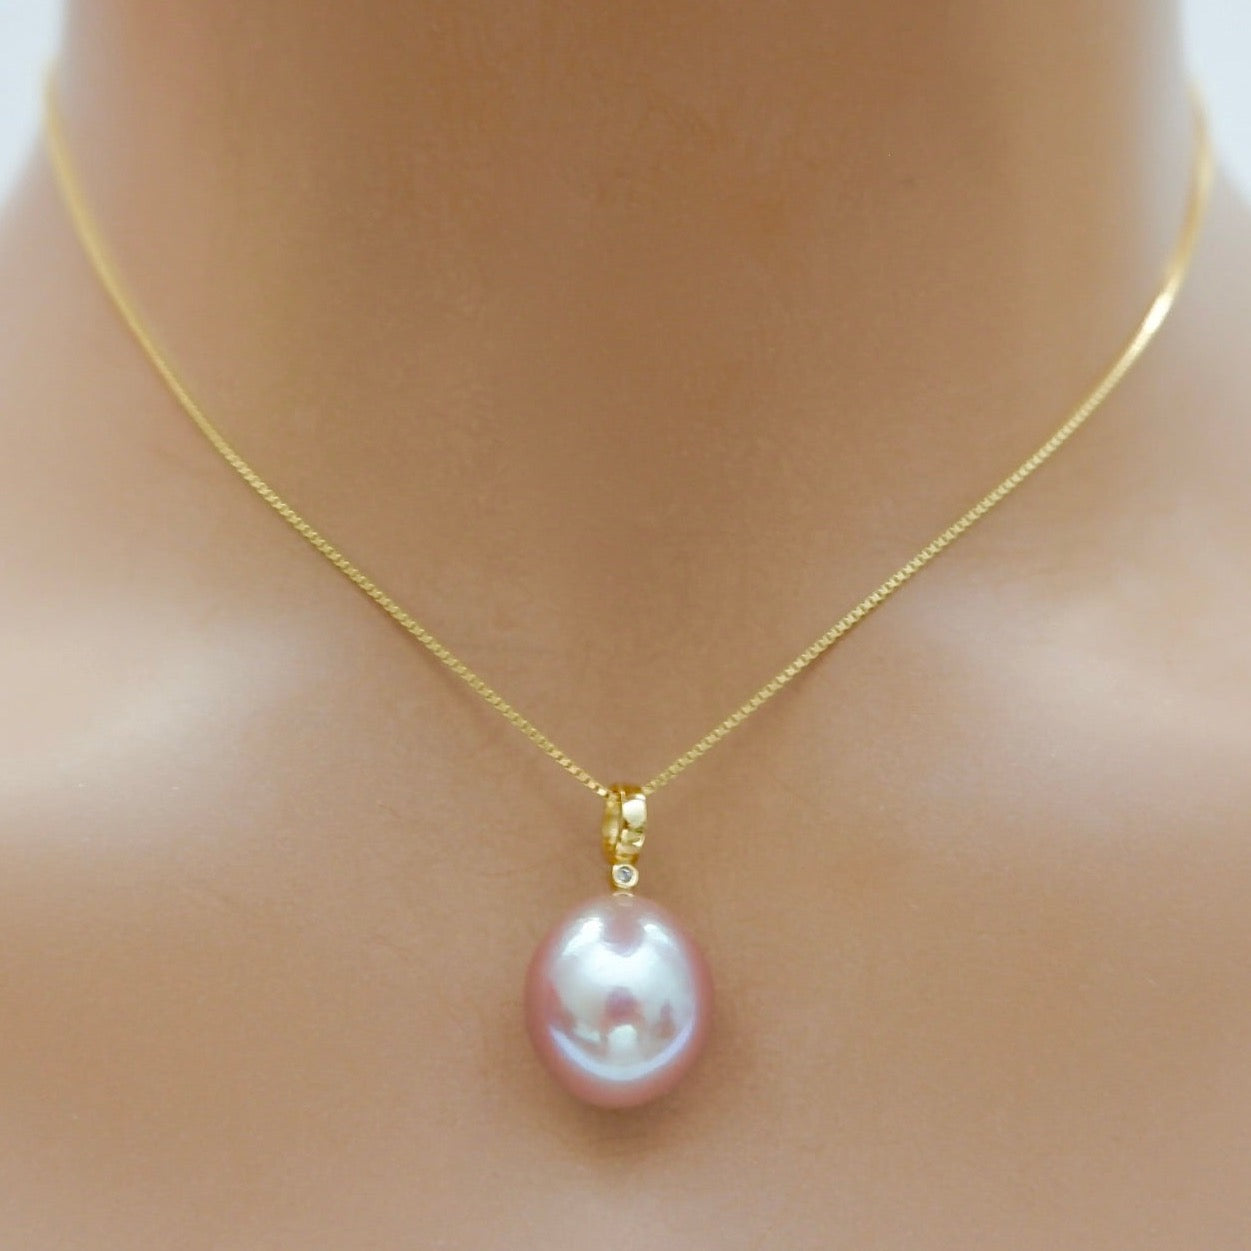 my pink pearl pendant necklace